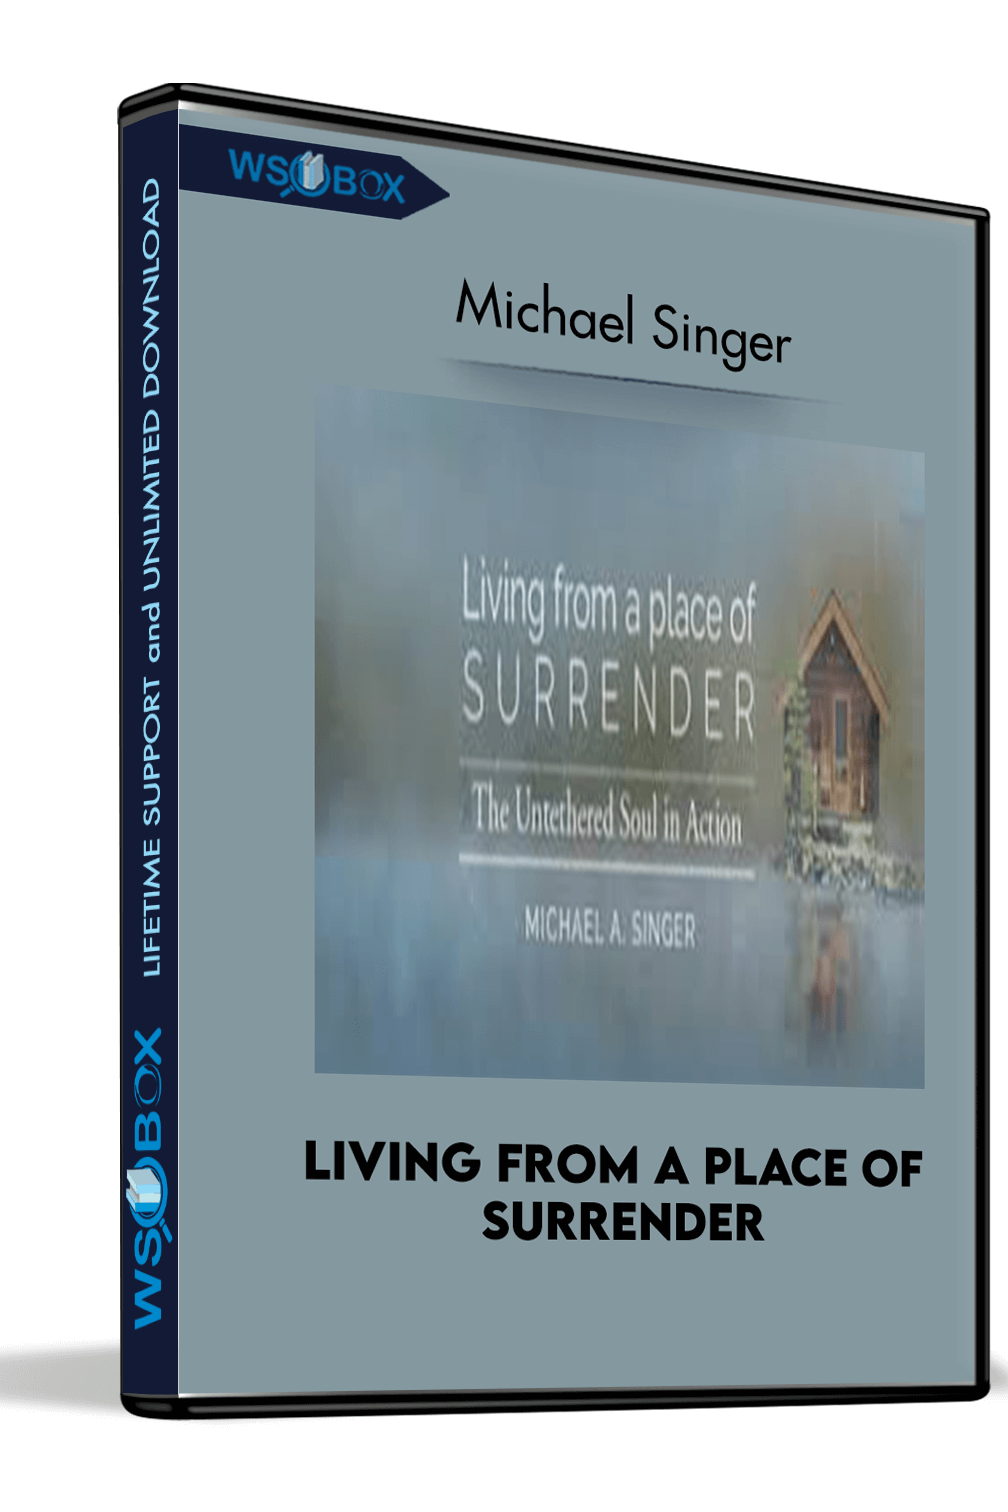 living-from-a-place-of-surrender-michael-singer